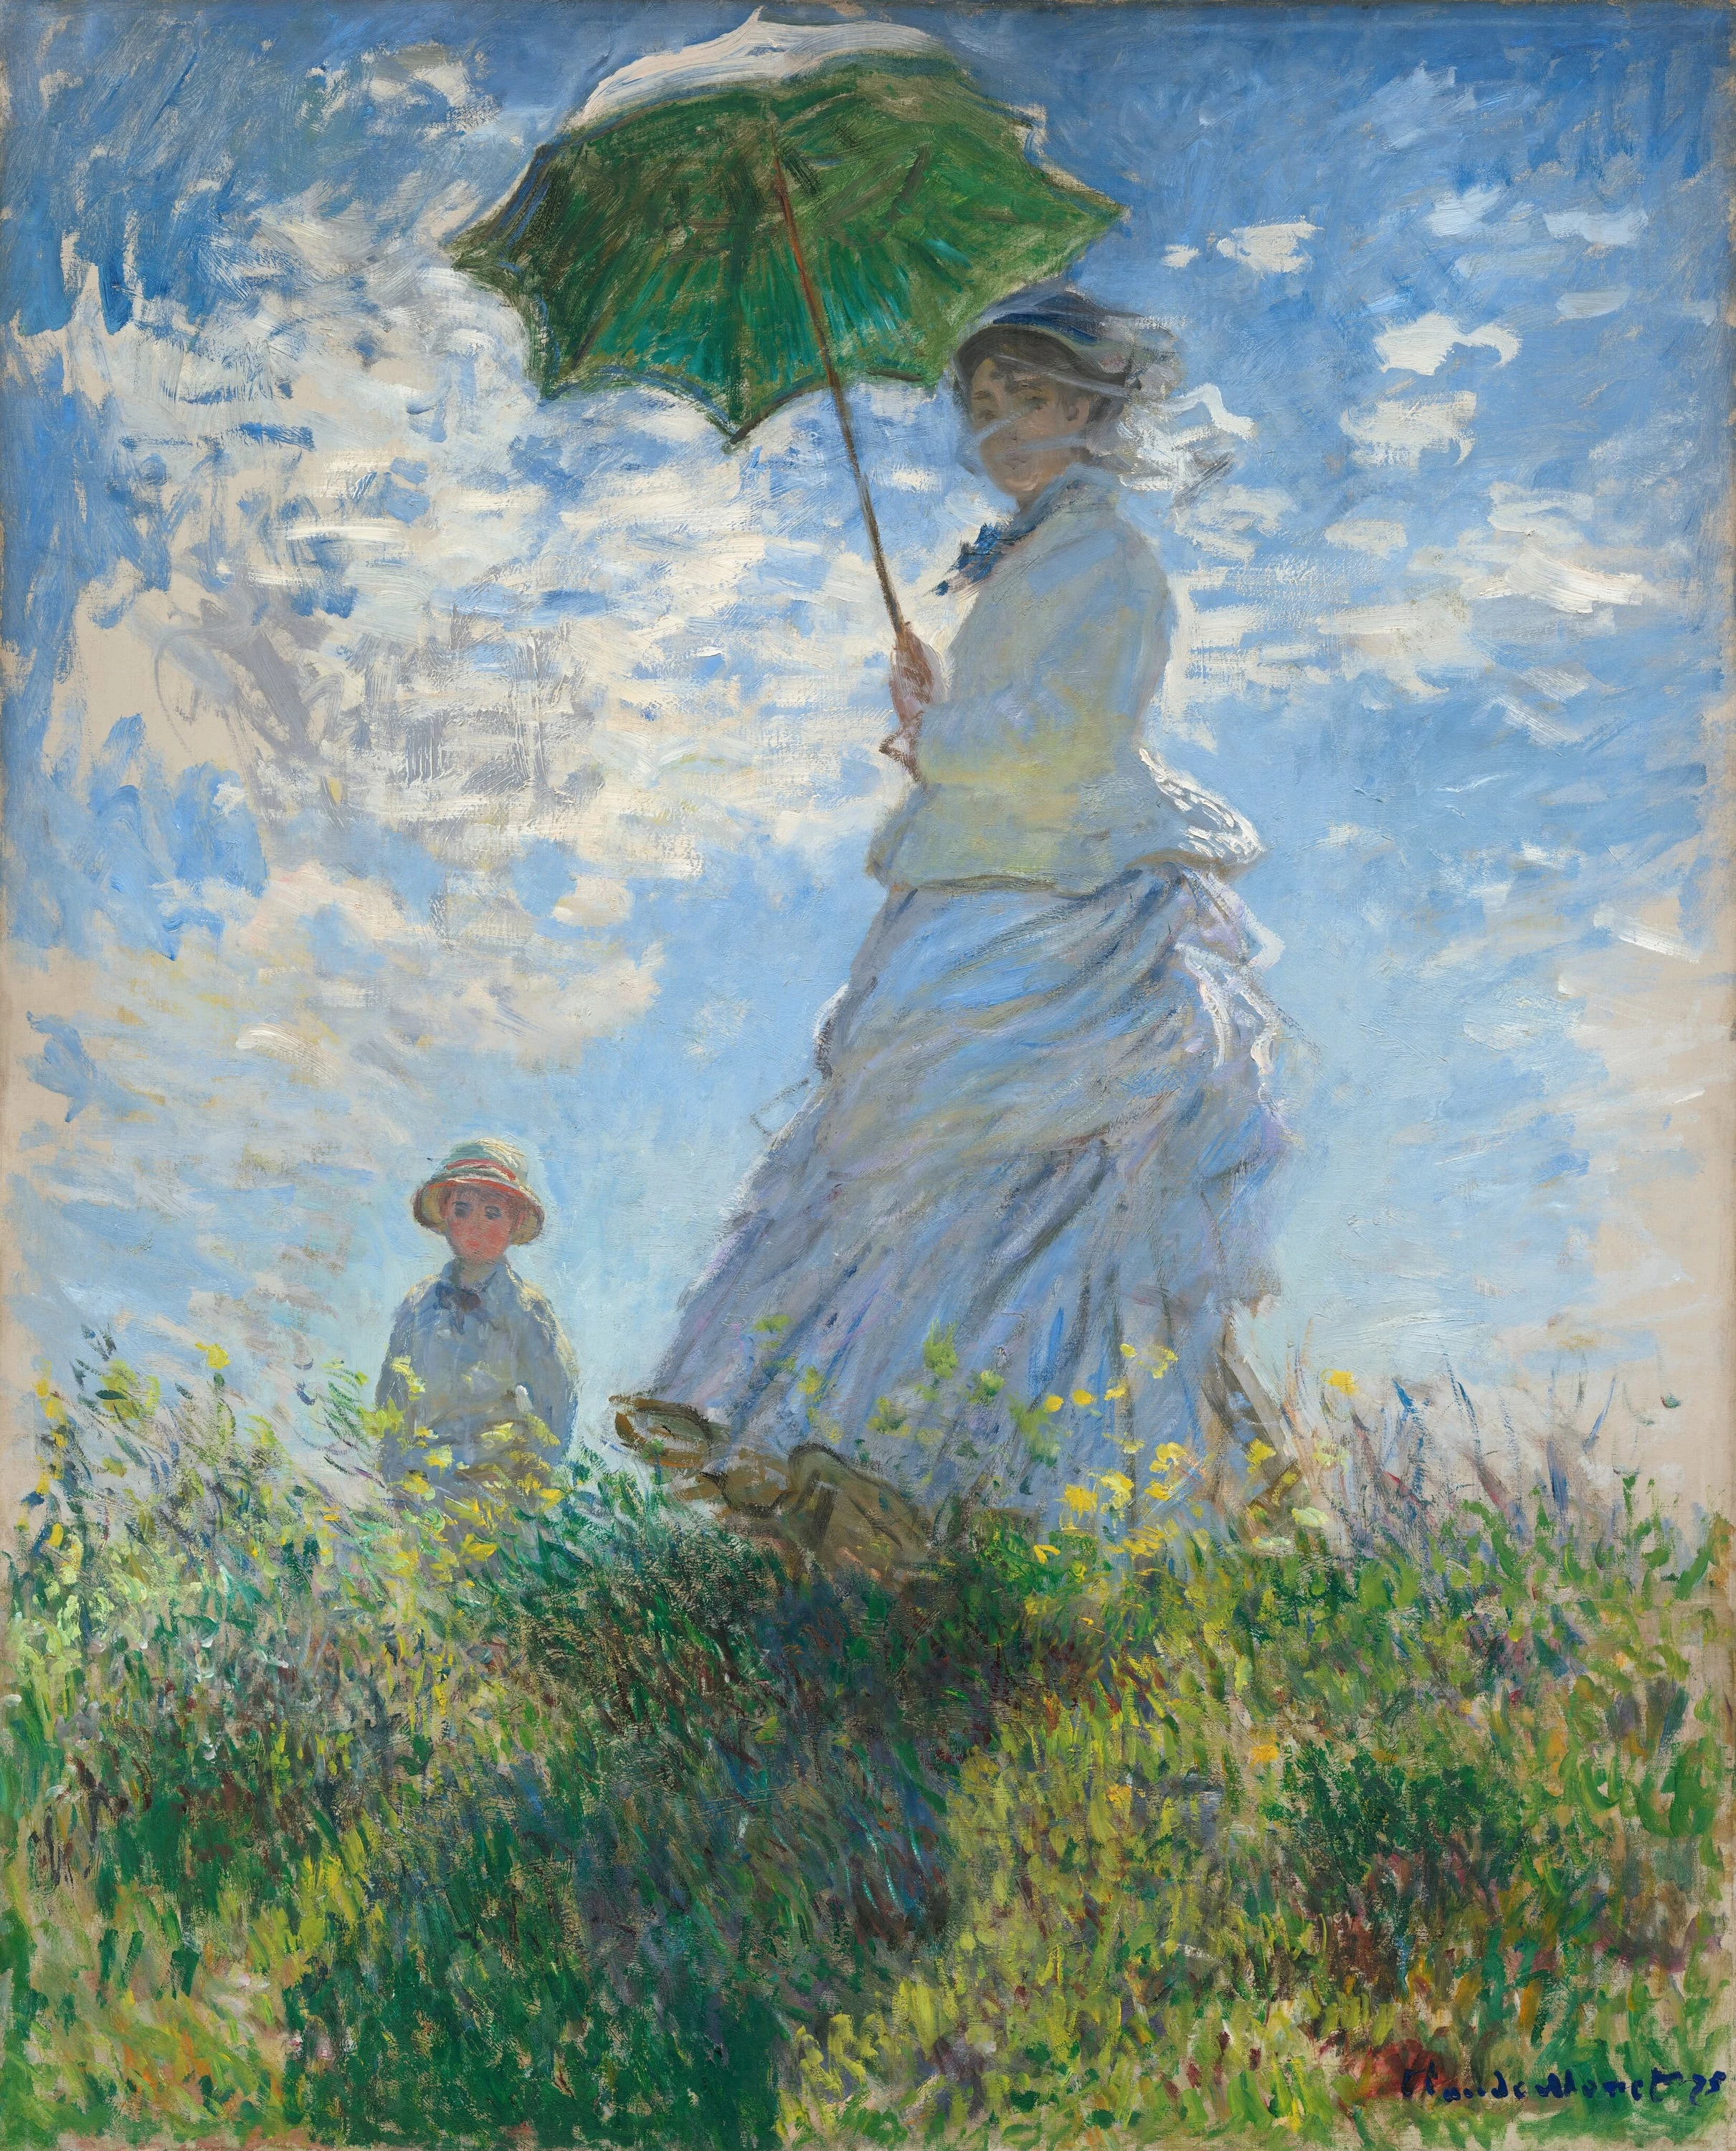 Woman with a Parasol, Madame Monet and Her Son, Claude Monet